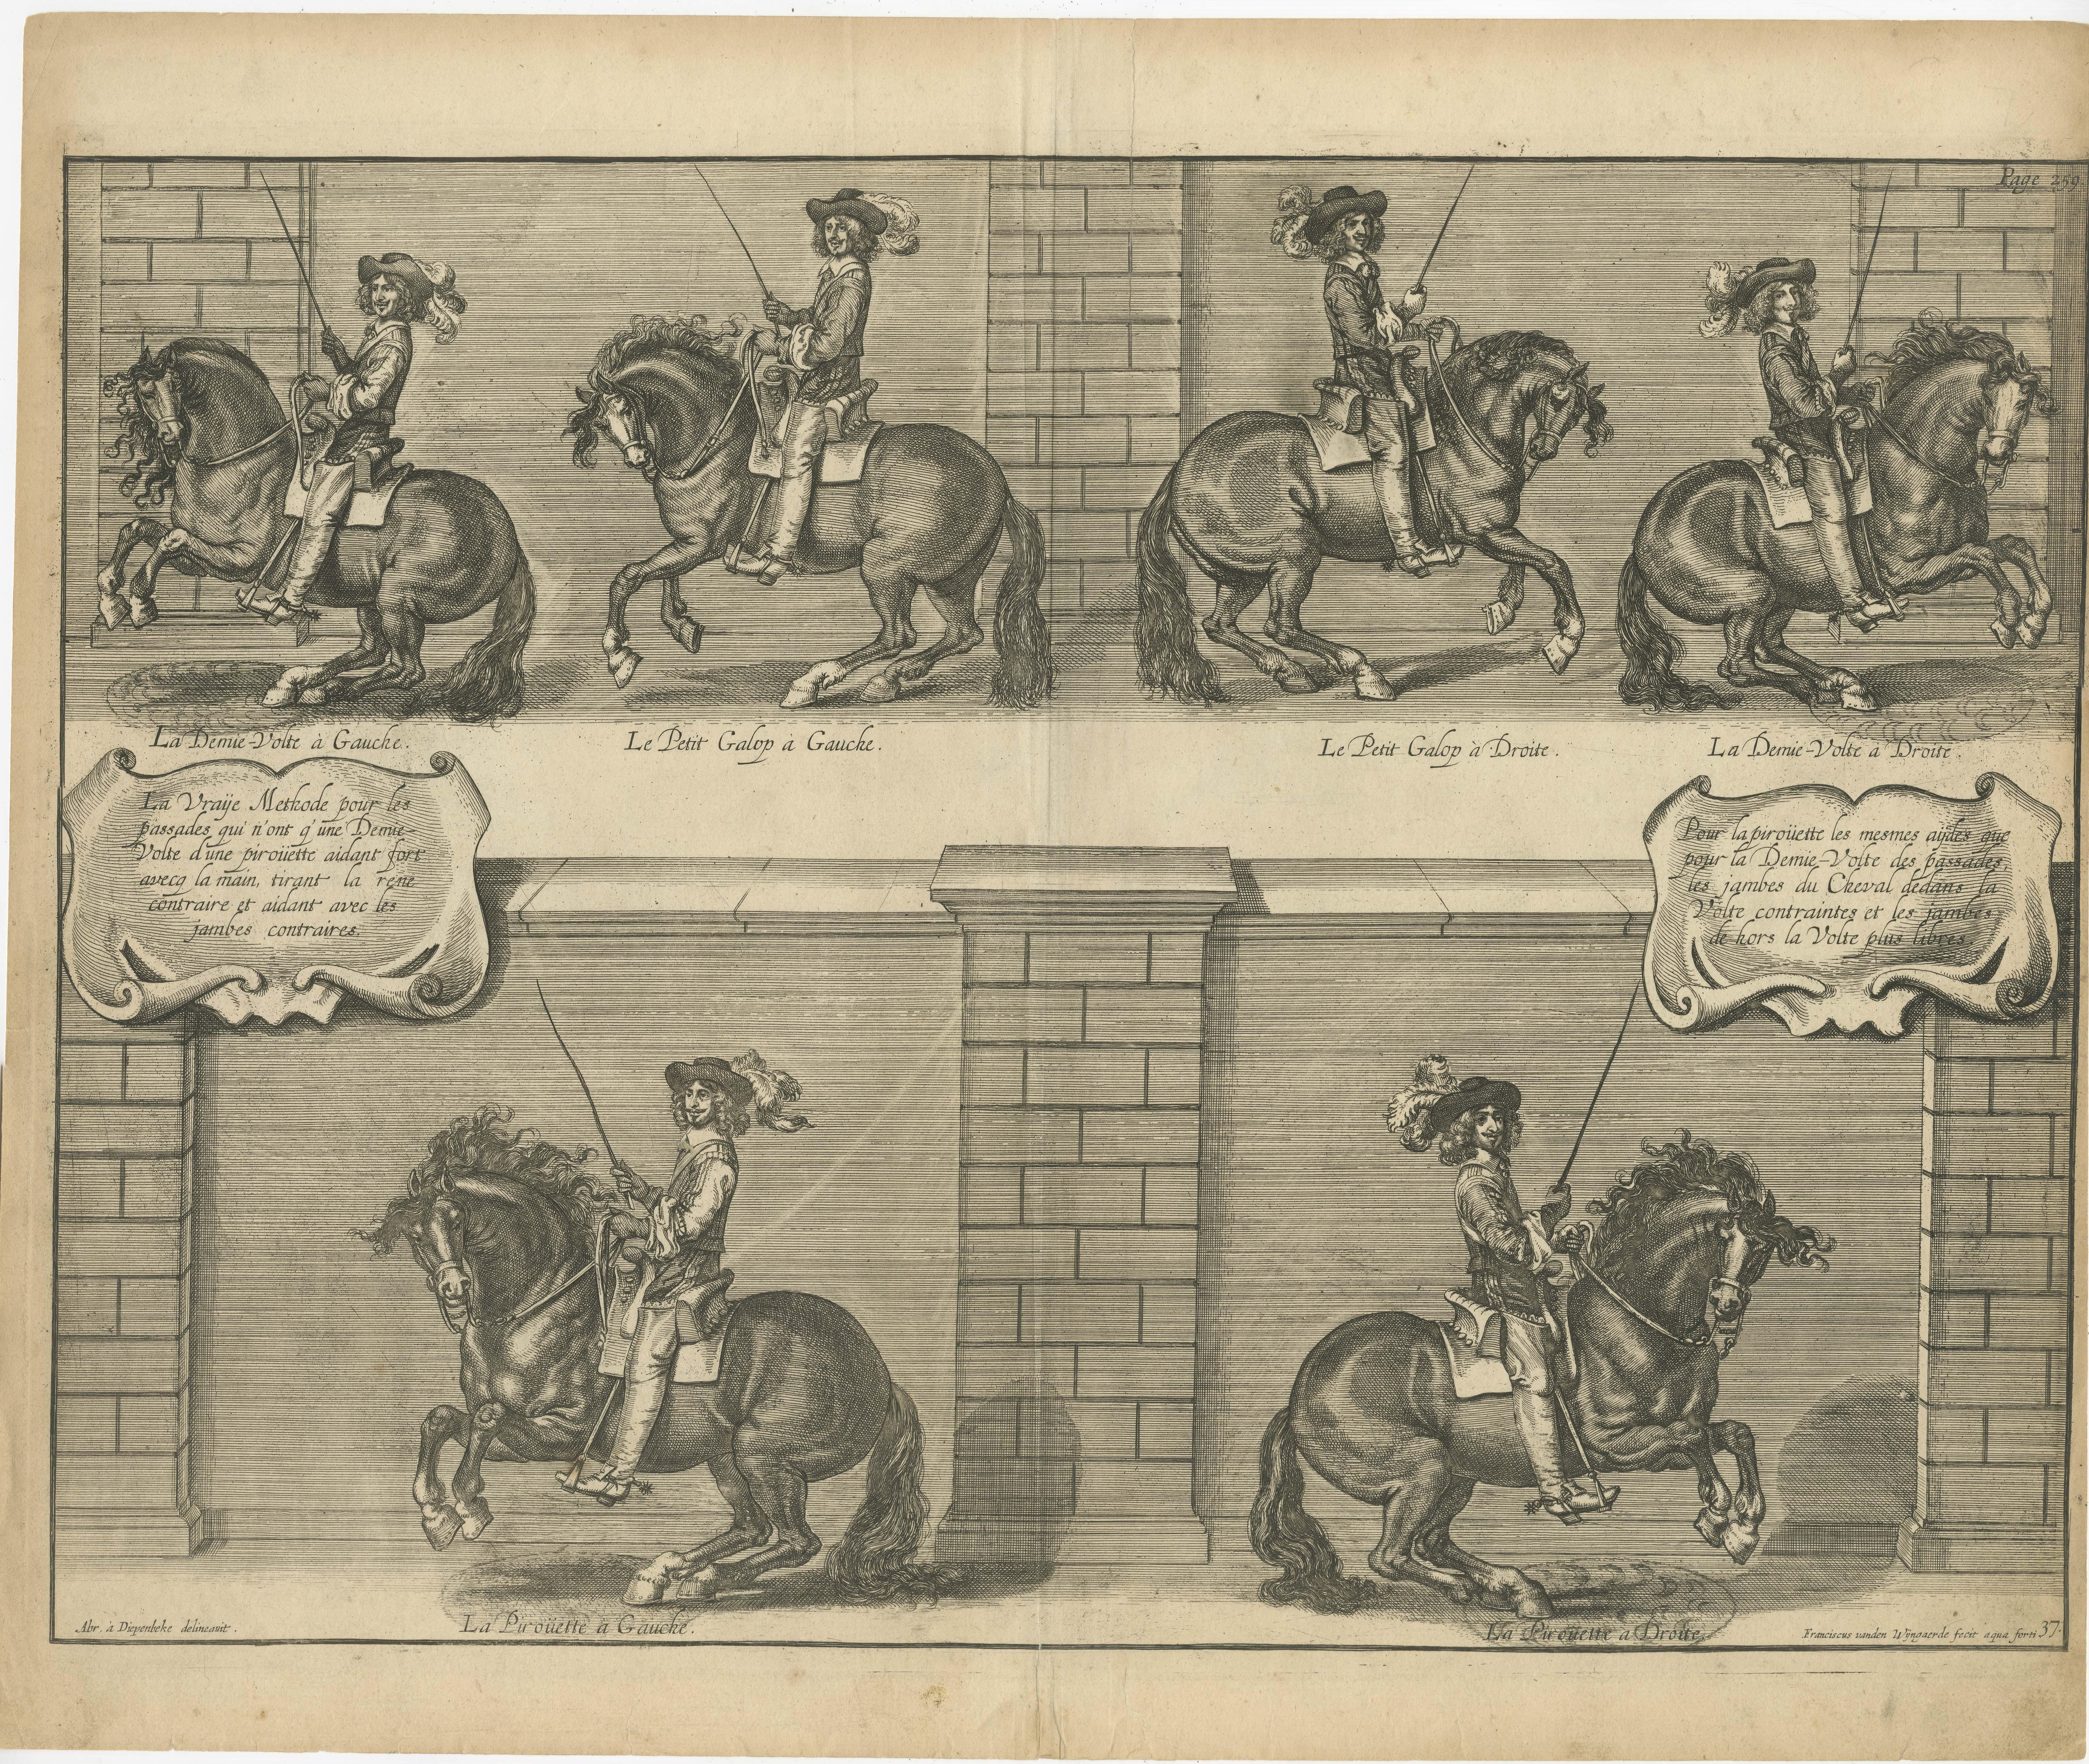 Antique print titled 'La Vraije Methode pour les passades (.)'. Original old print of the Duke of Newcastle enacting half turns, canters and pirouettes on horseback. This print originates from the 1737 English edition of Cavendish's exposition on